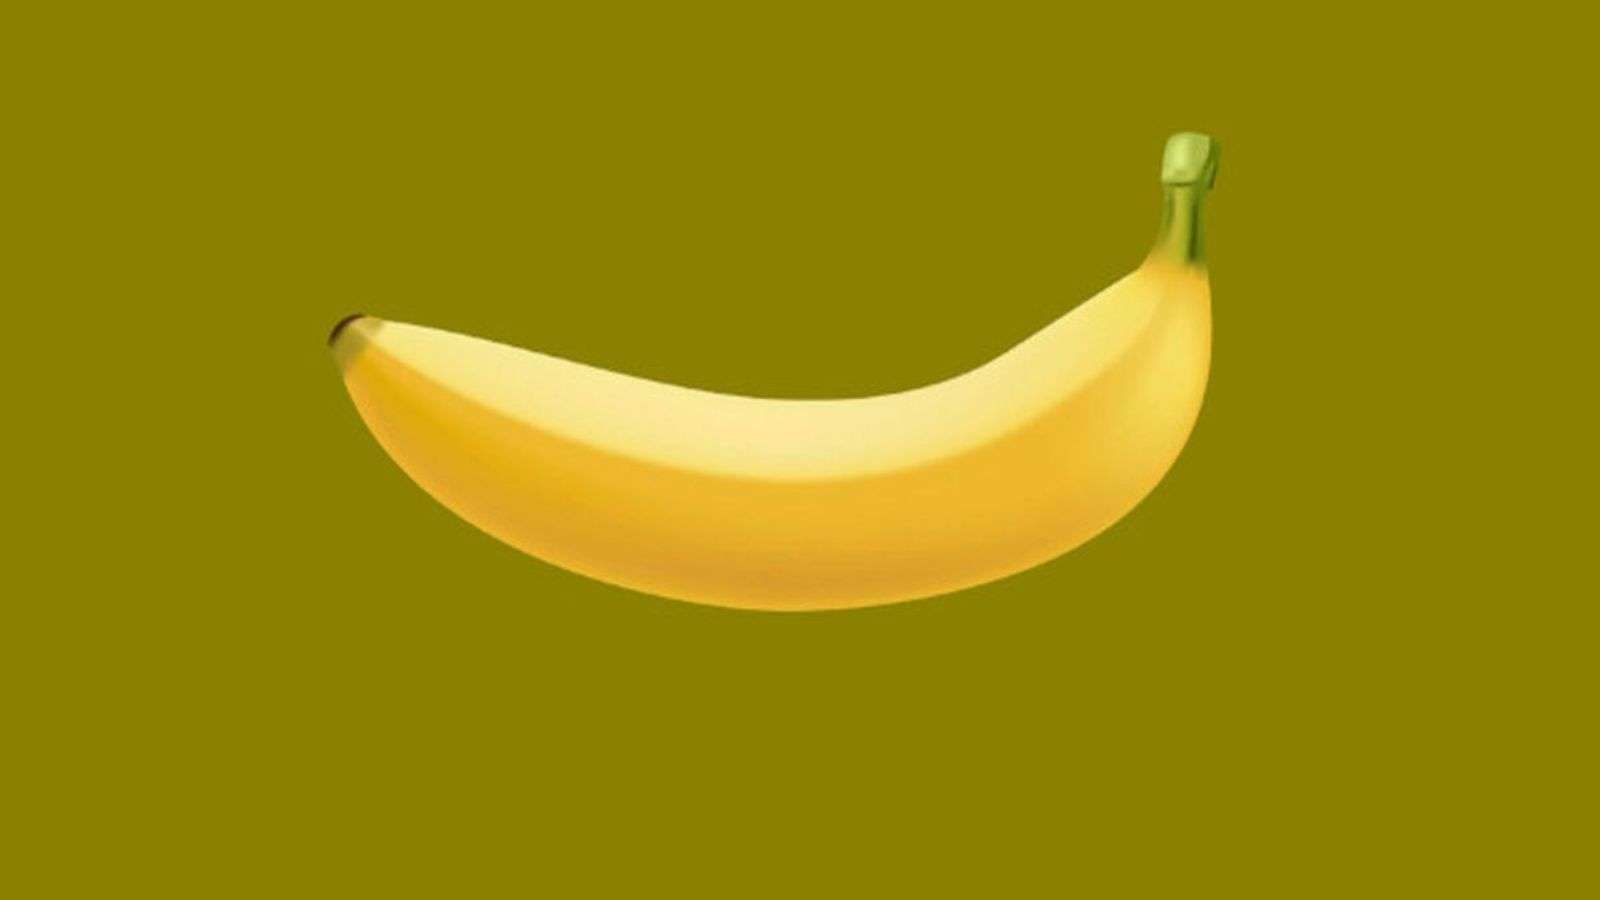 Banana game from Steam